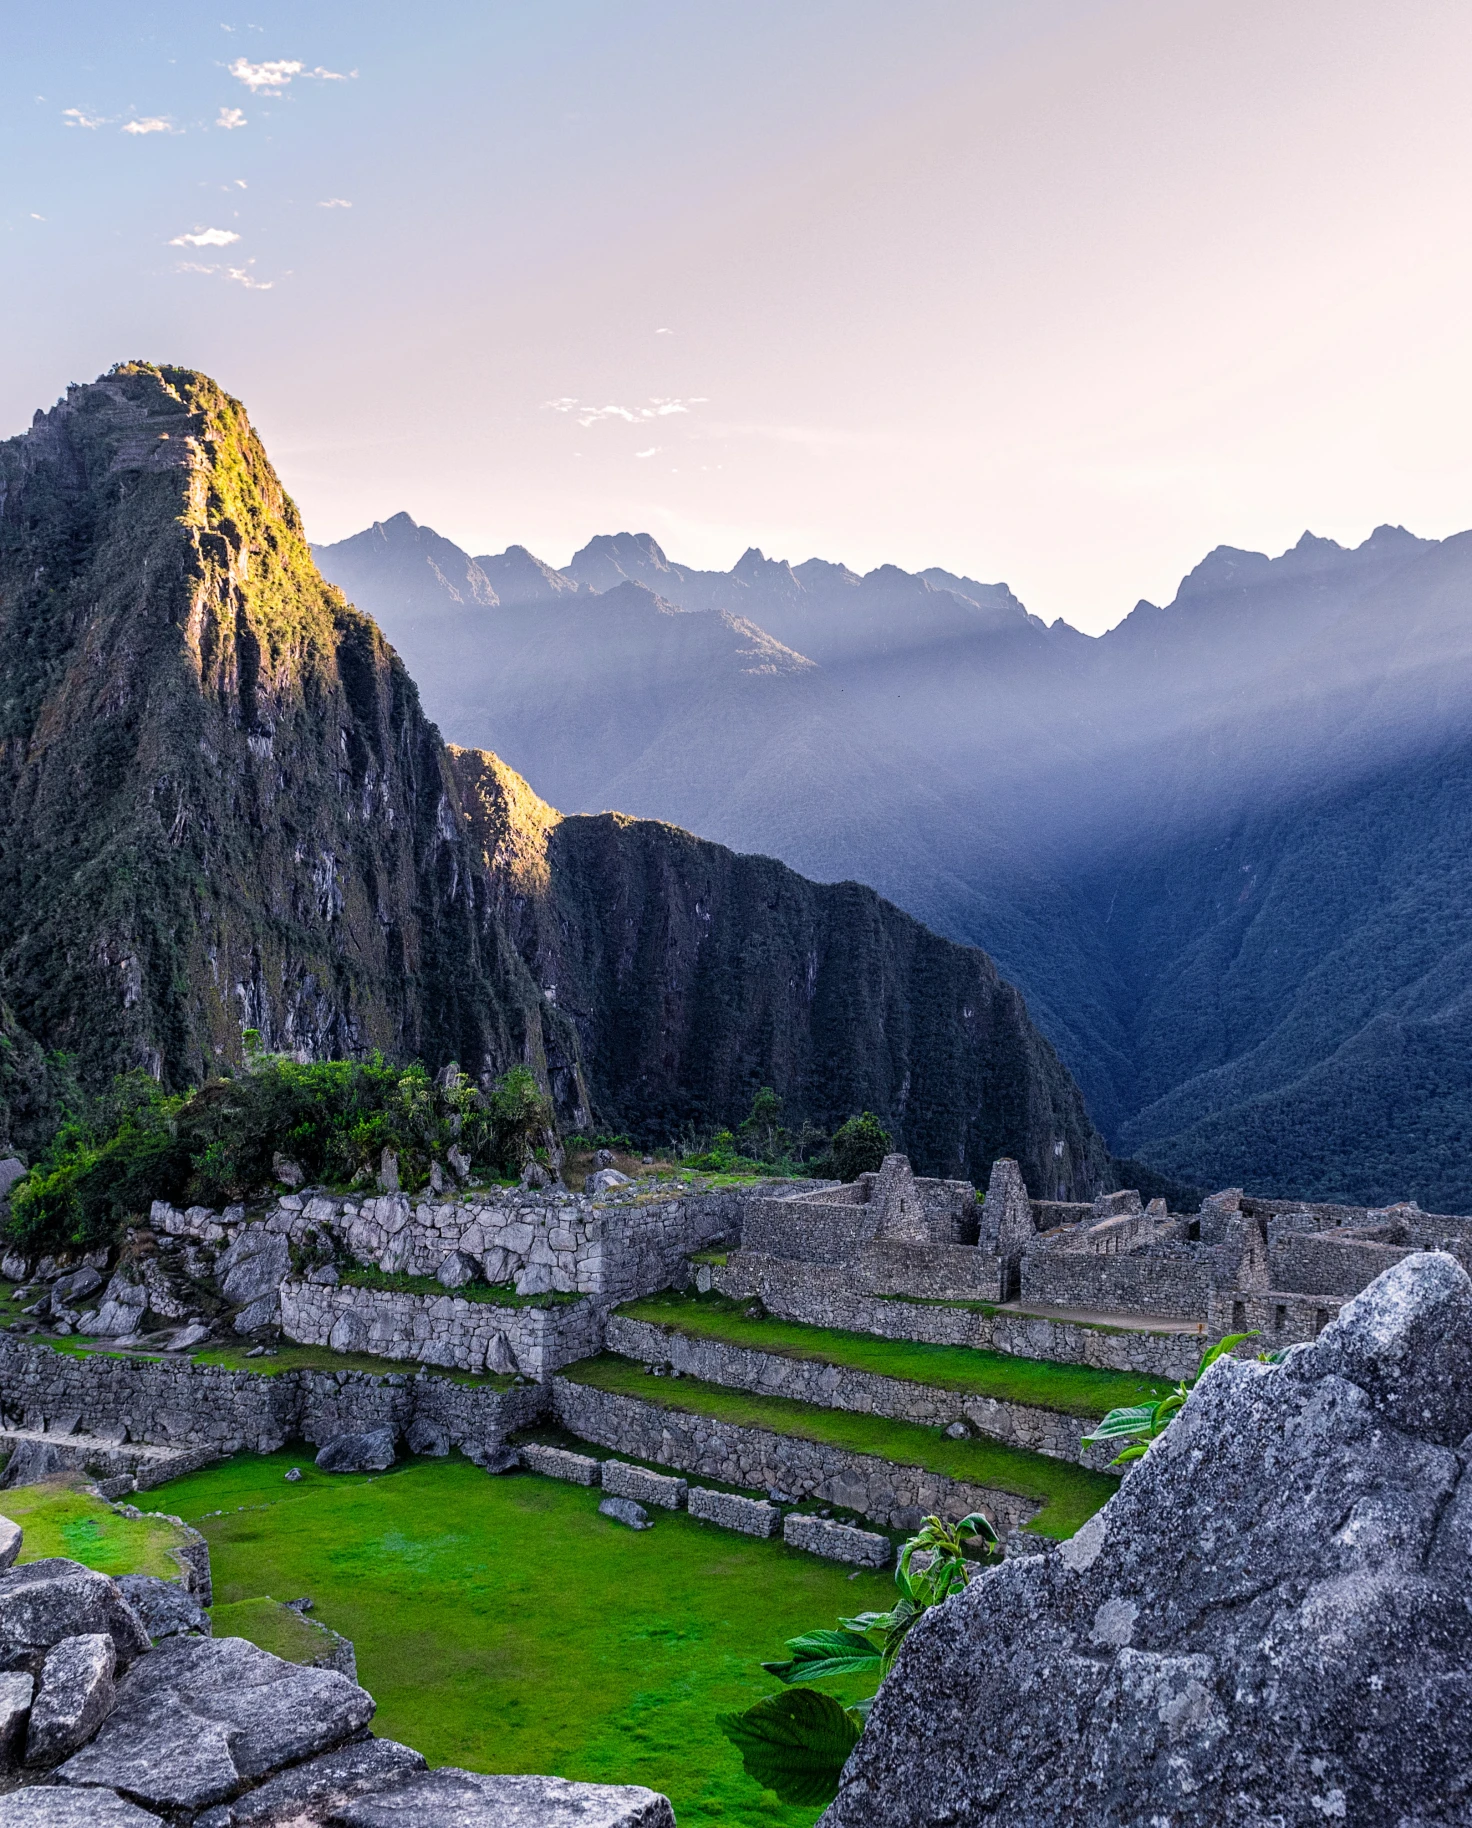 Machu Picchu in Peru green grass with grey stones and blue mountains with a beaming light